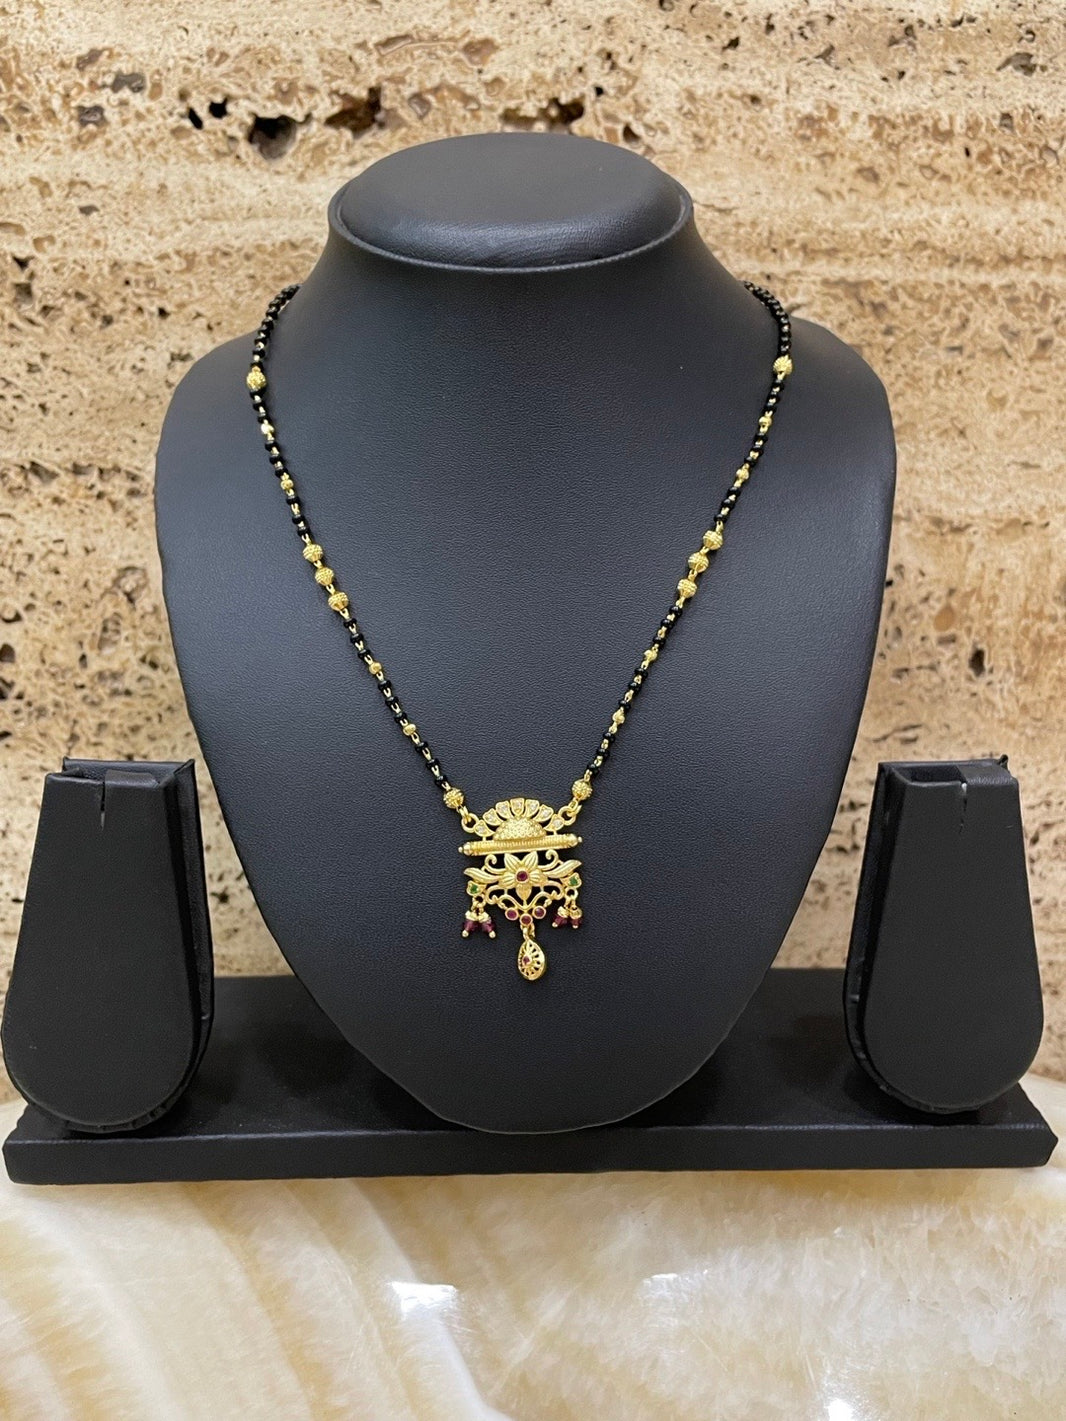 Explore Artificial Mangalsutra Designs With Weight and Price | DDR ...